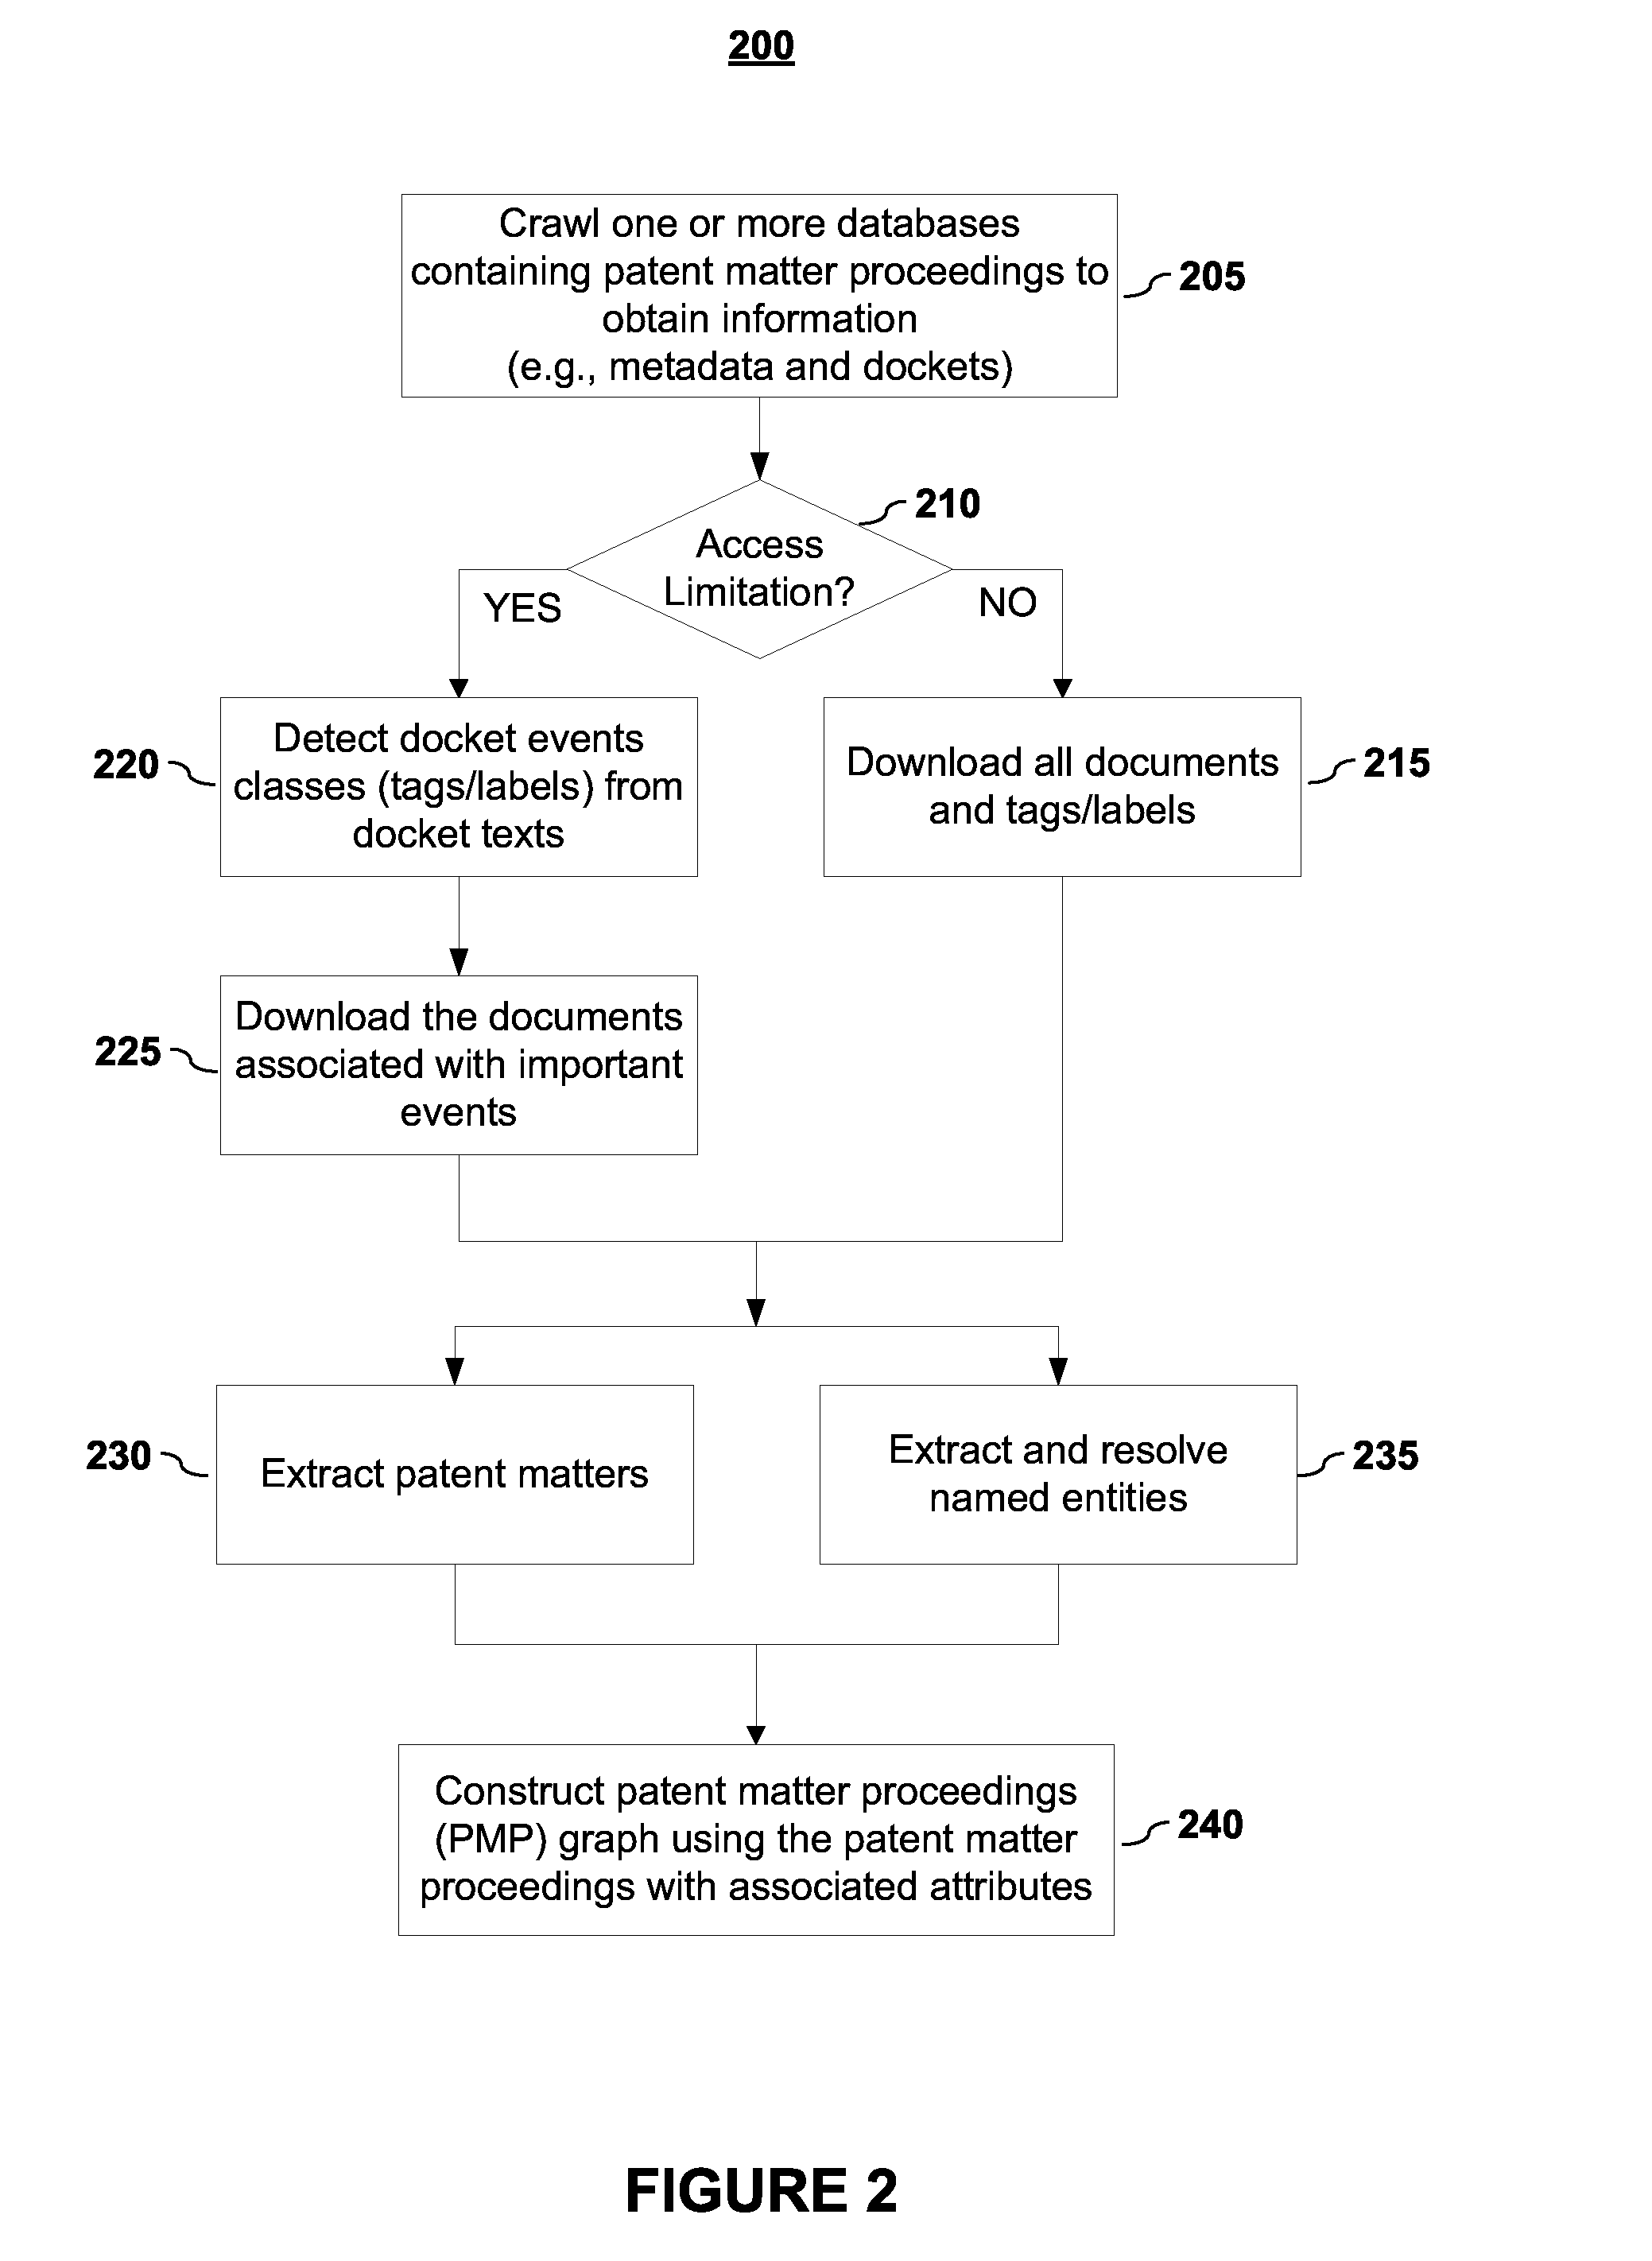 Systems and Methods for Using Non-Textual Information In Analyzing Patent Matters